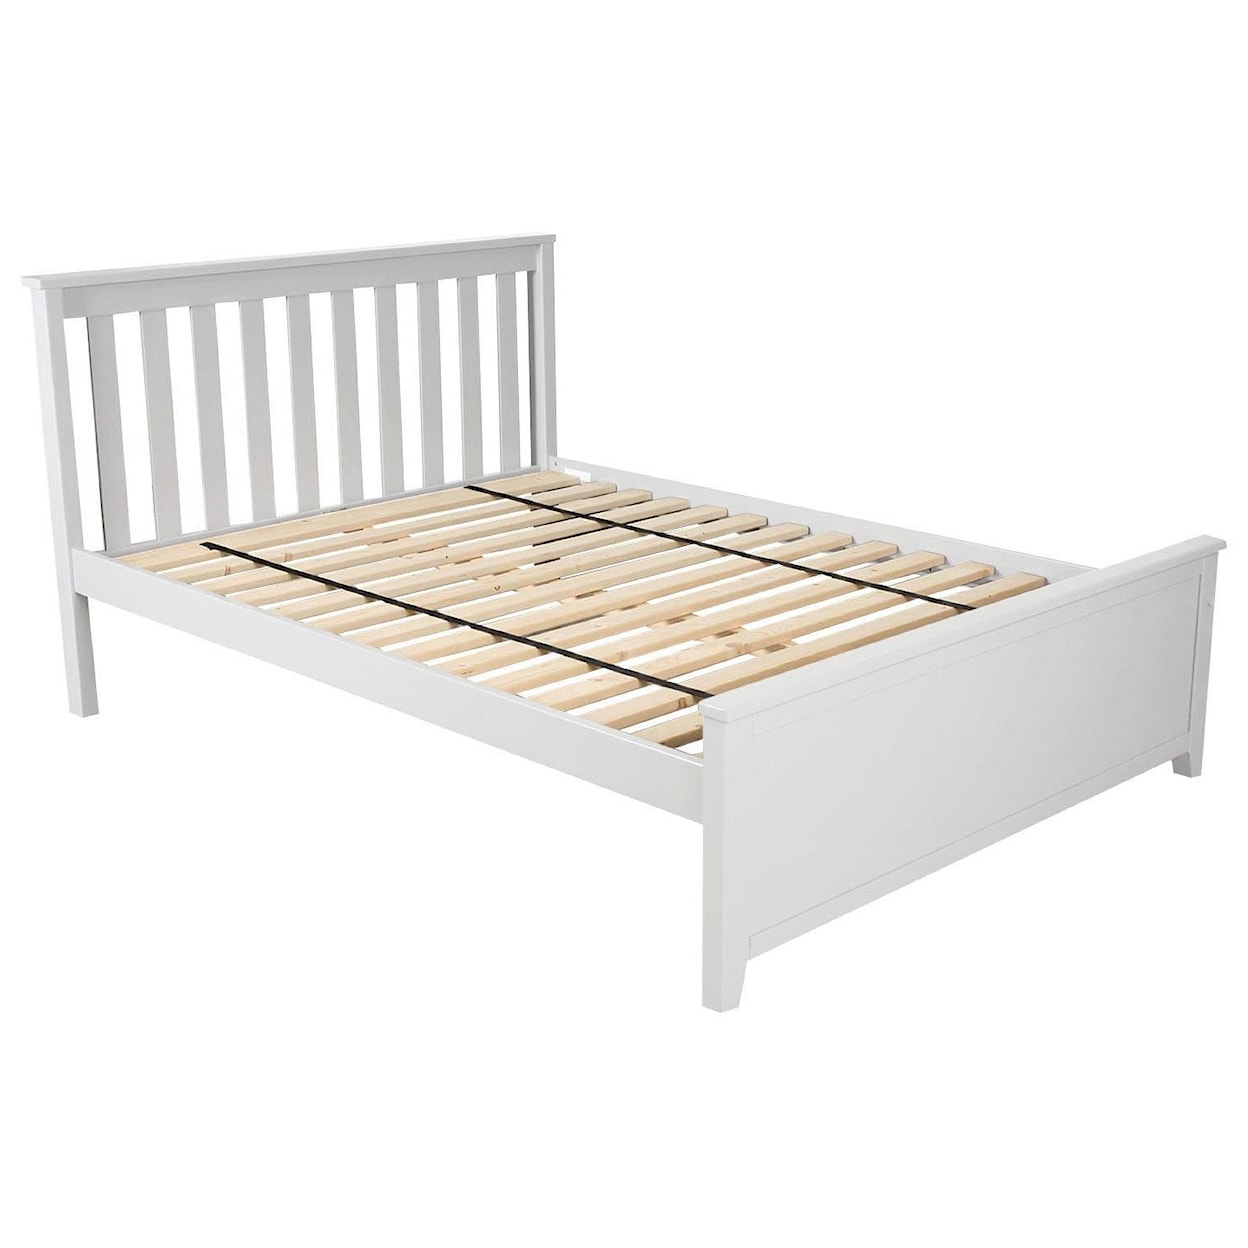 Jackpot Kids Single Beds Dover Full Bed in White